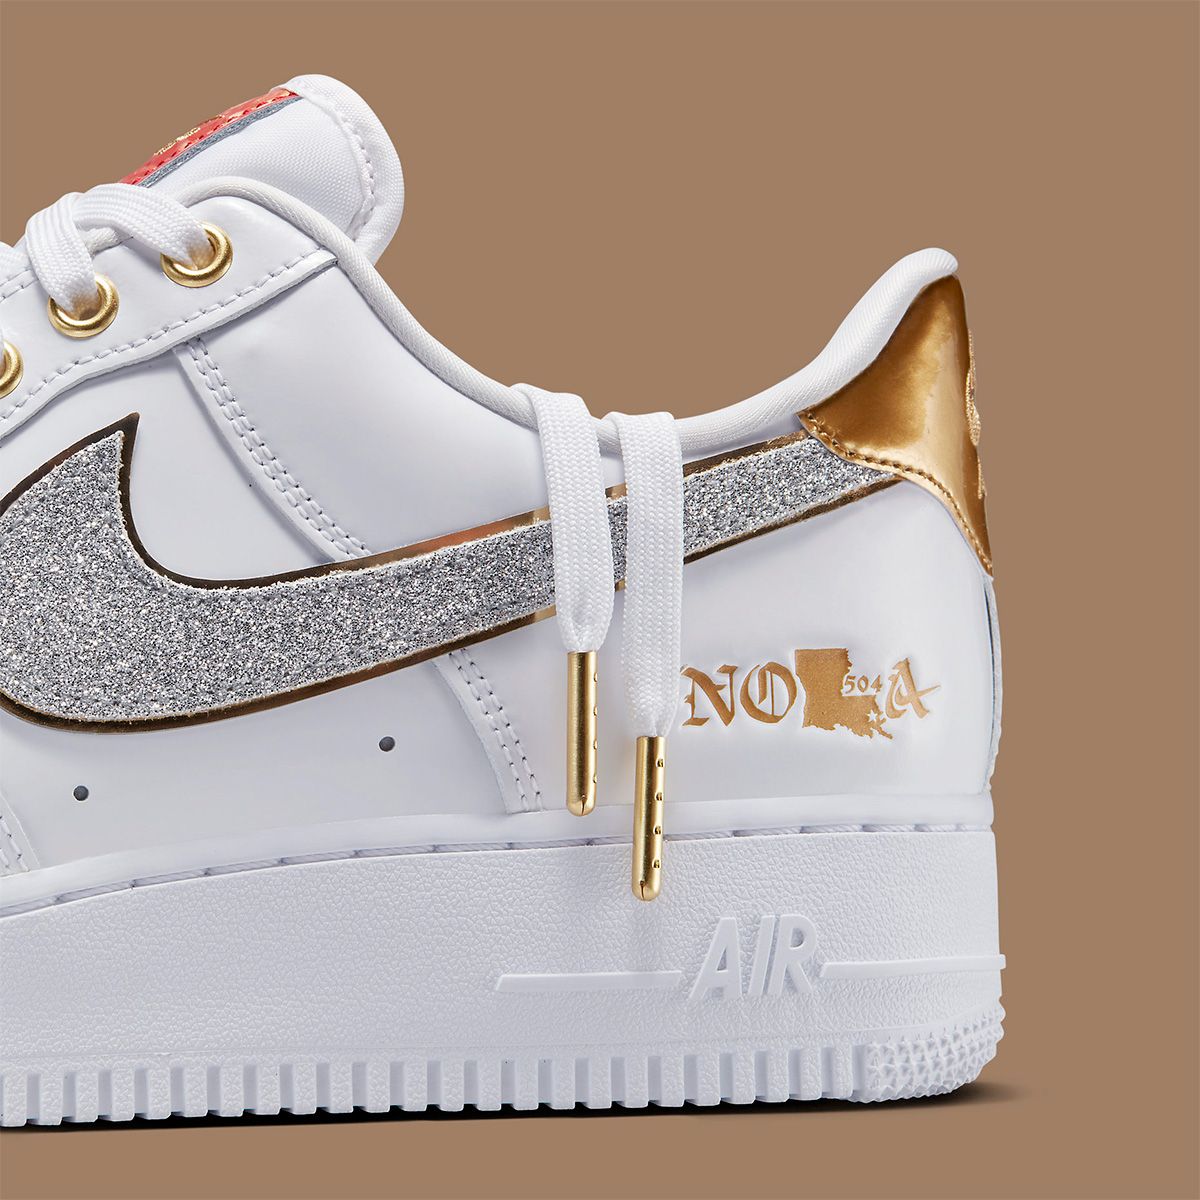 First new air force 1 Looks // Nike Air Force 1 Low "NOLA" | HOUSE OF HEAT